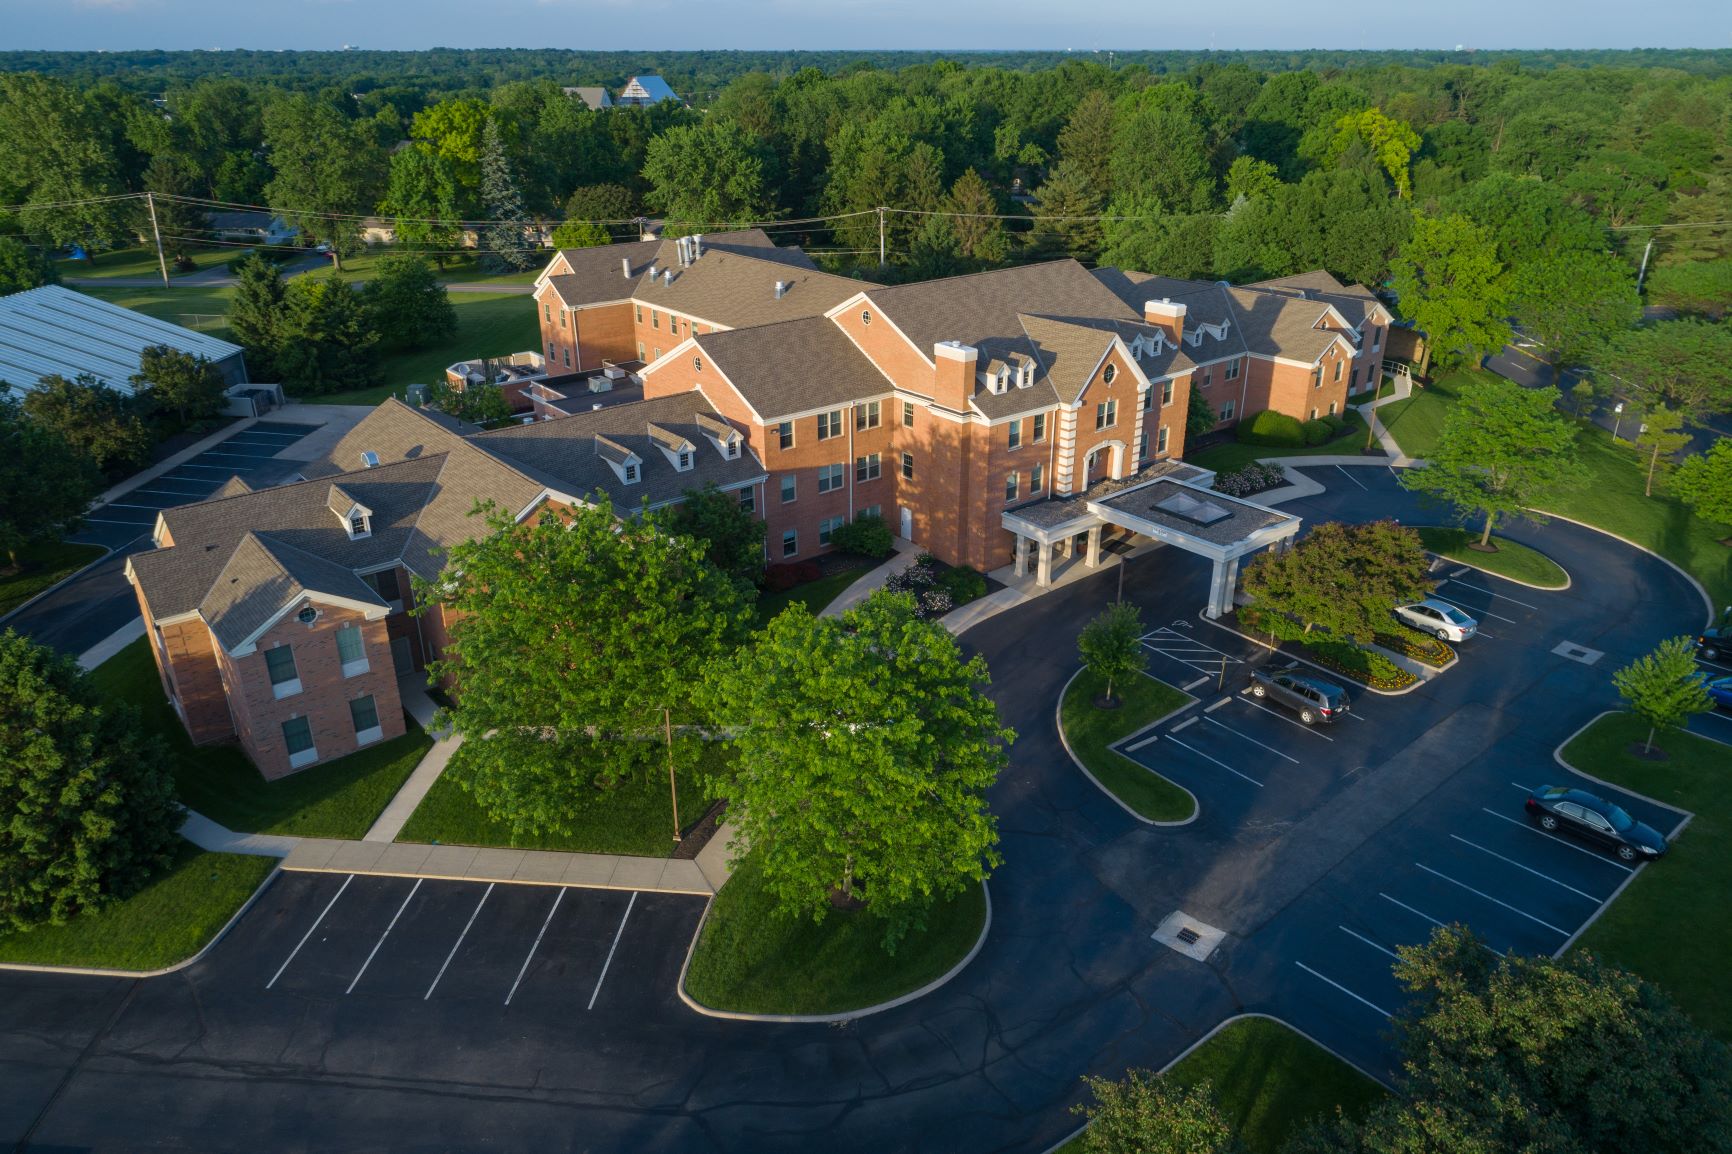 Exterior of Harmony Trace assisted living community